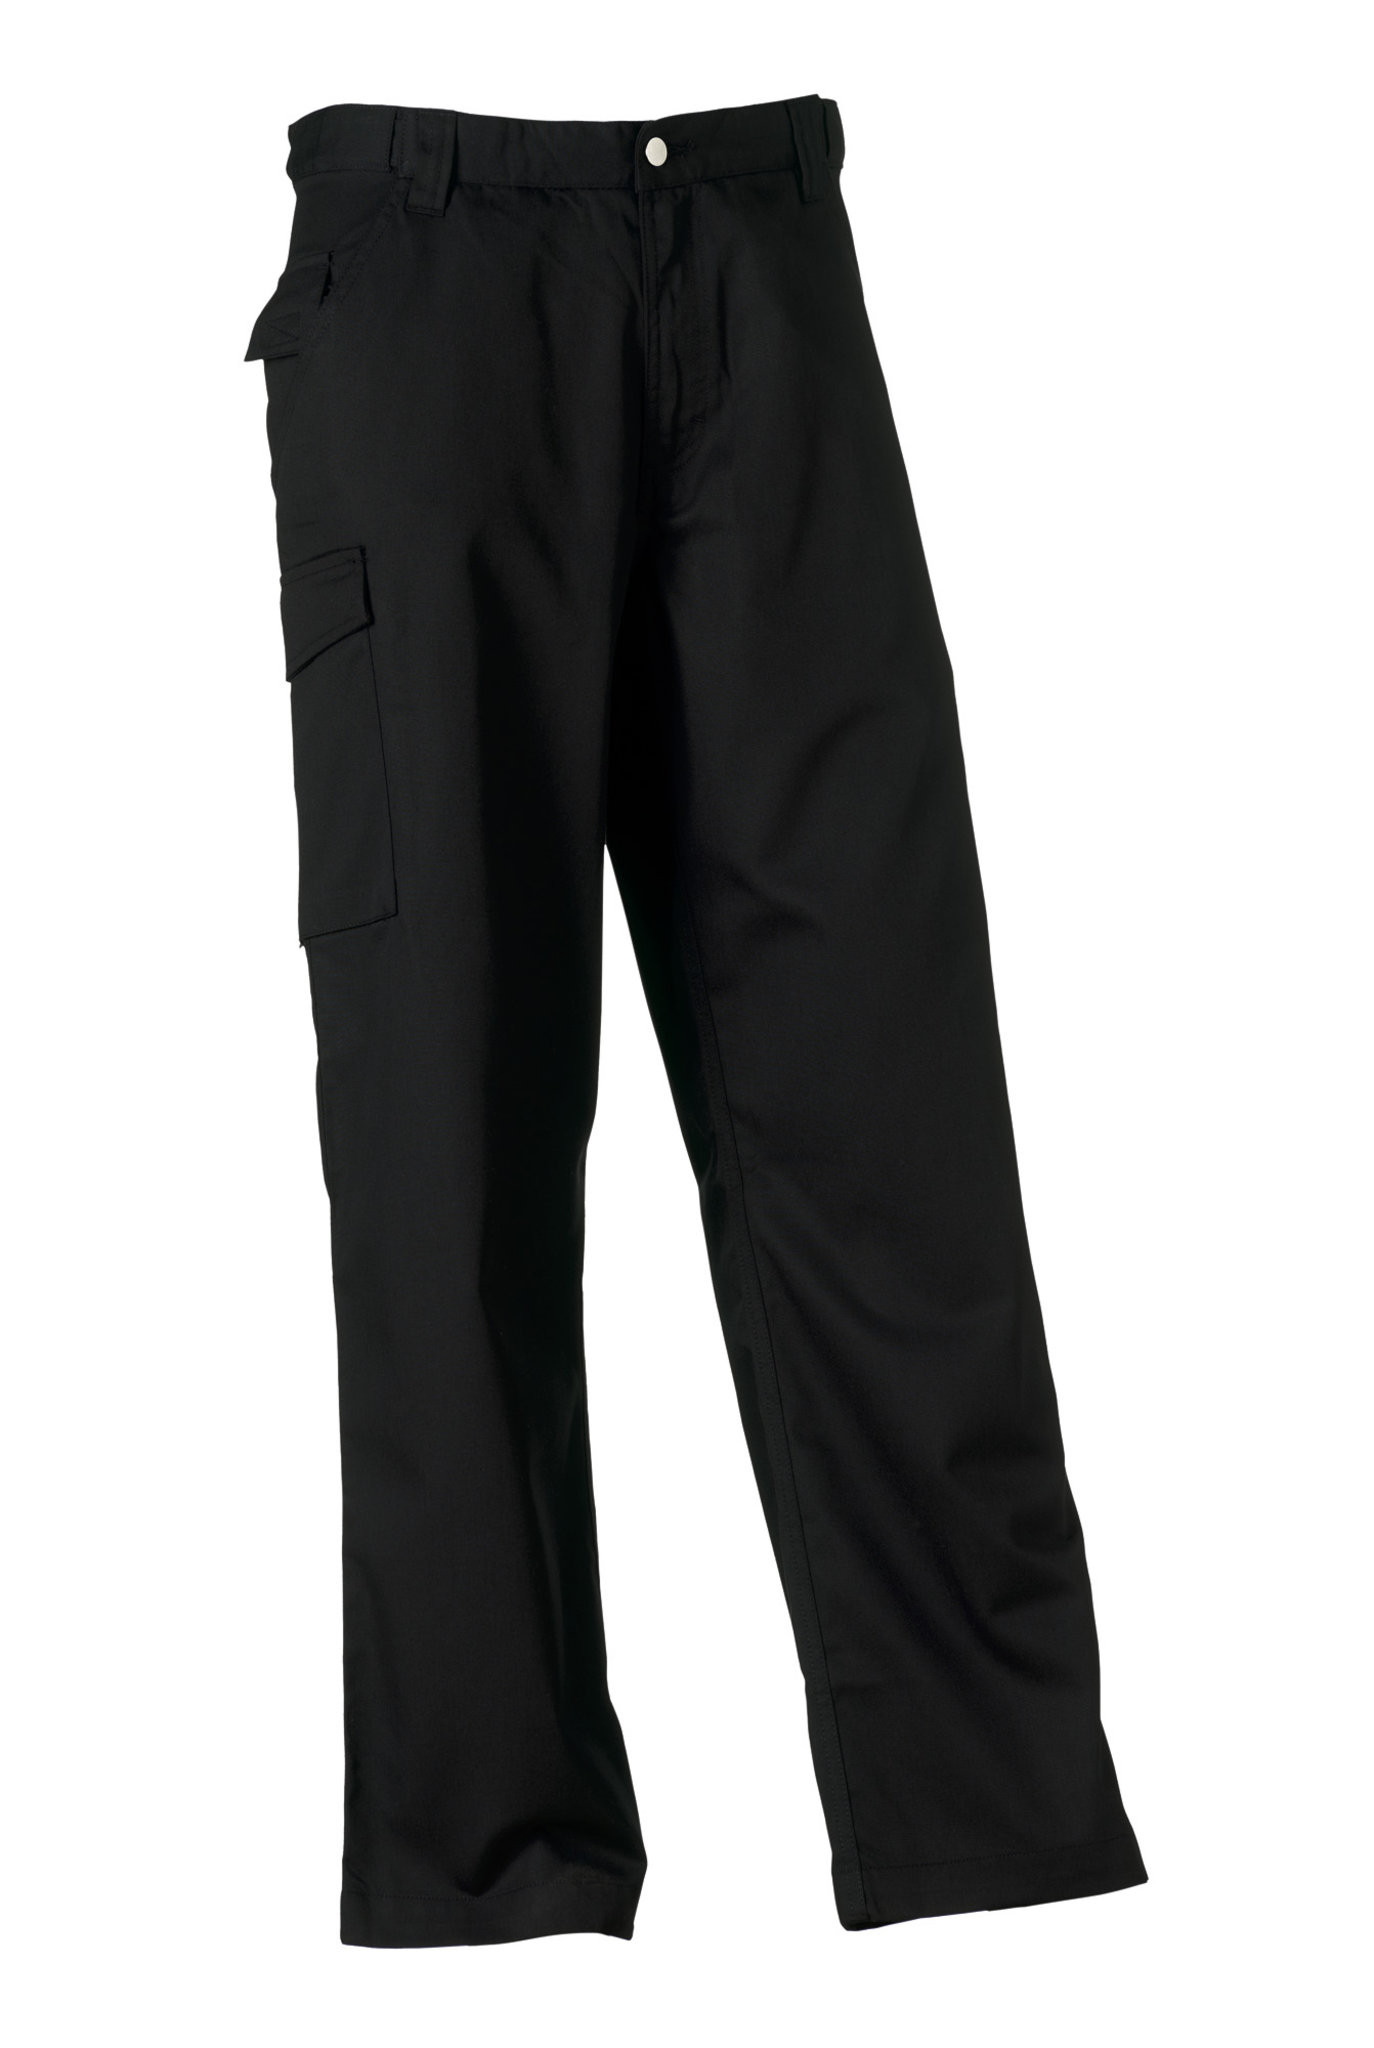 Russell JZ001 - Work Trousers